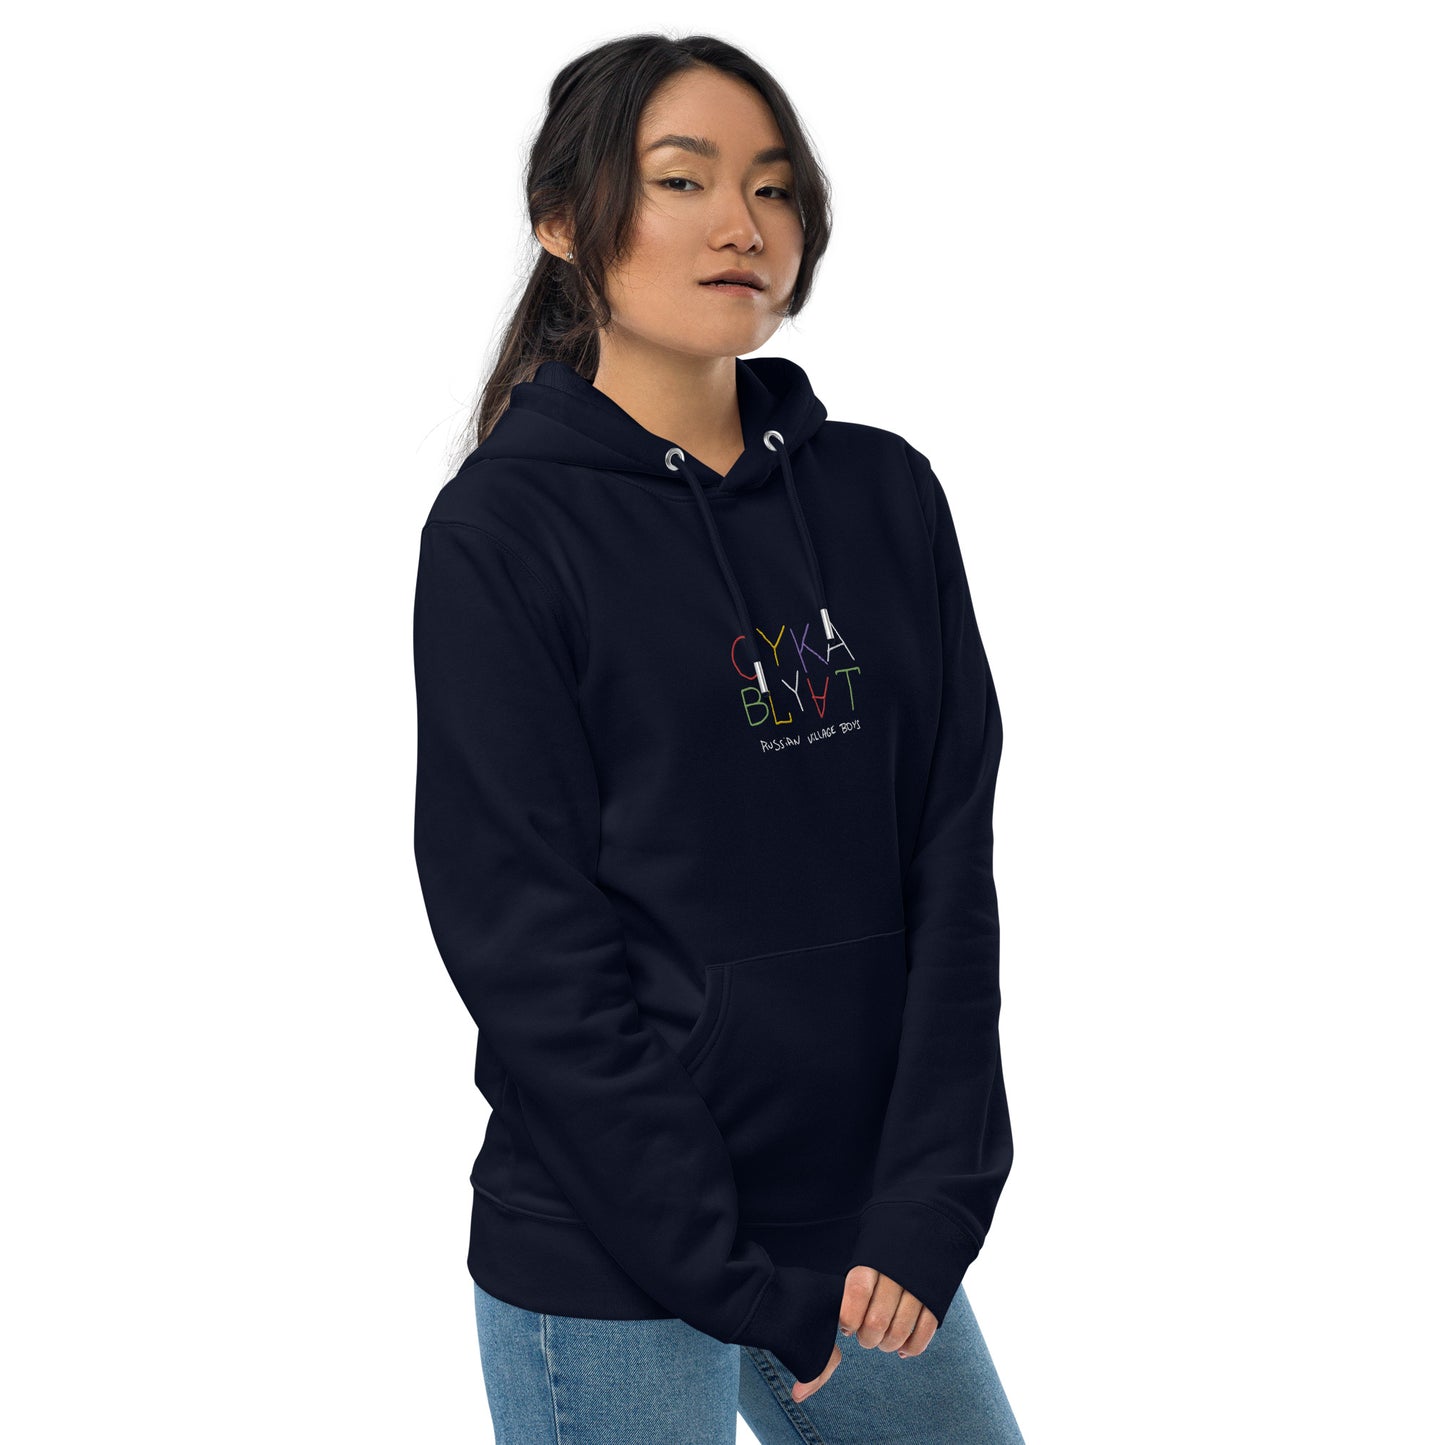 CYKA BLYAT Unisex hoodie  with embroidery